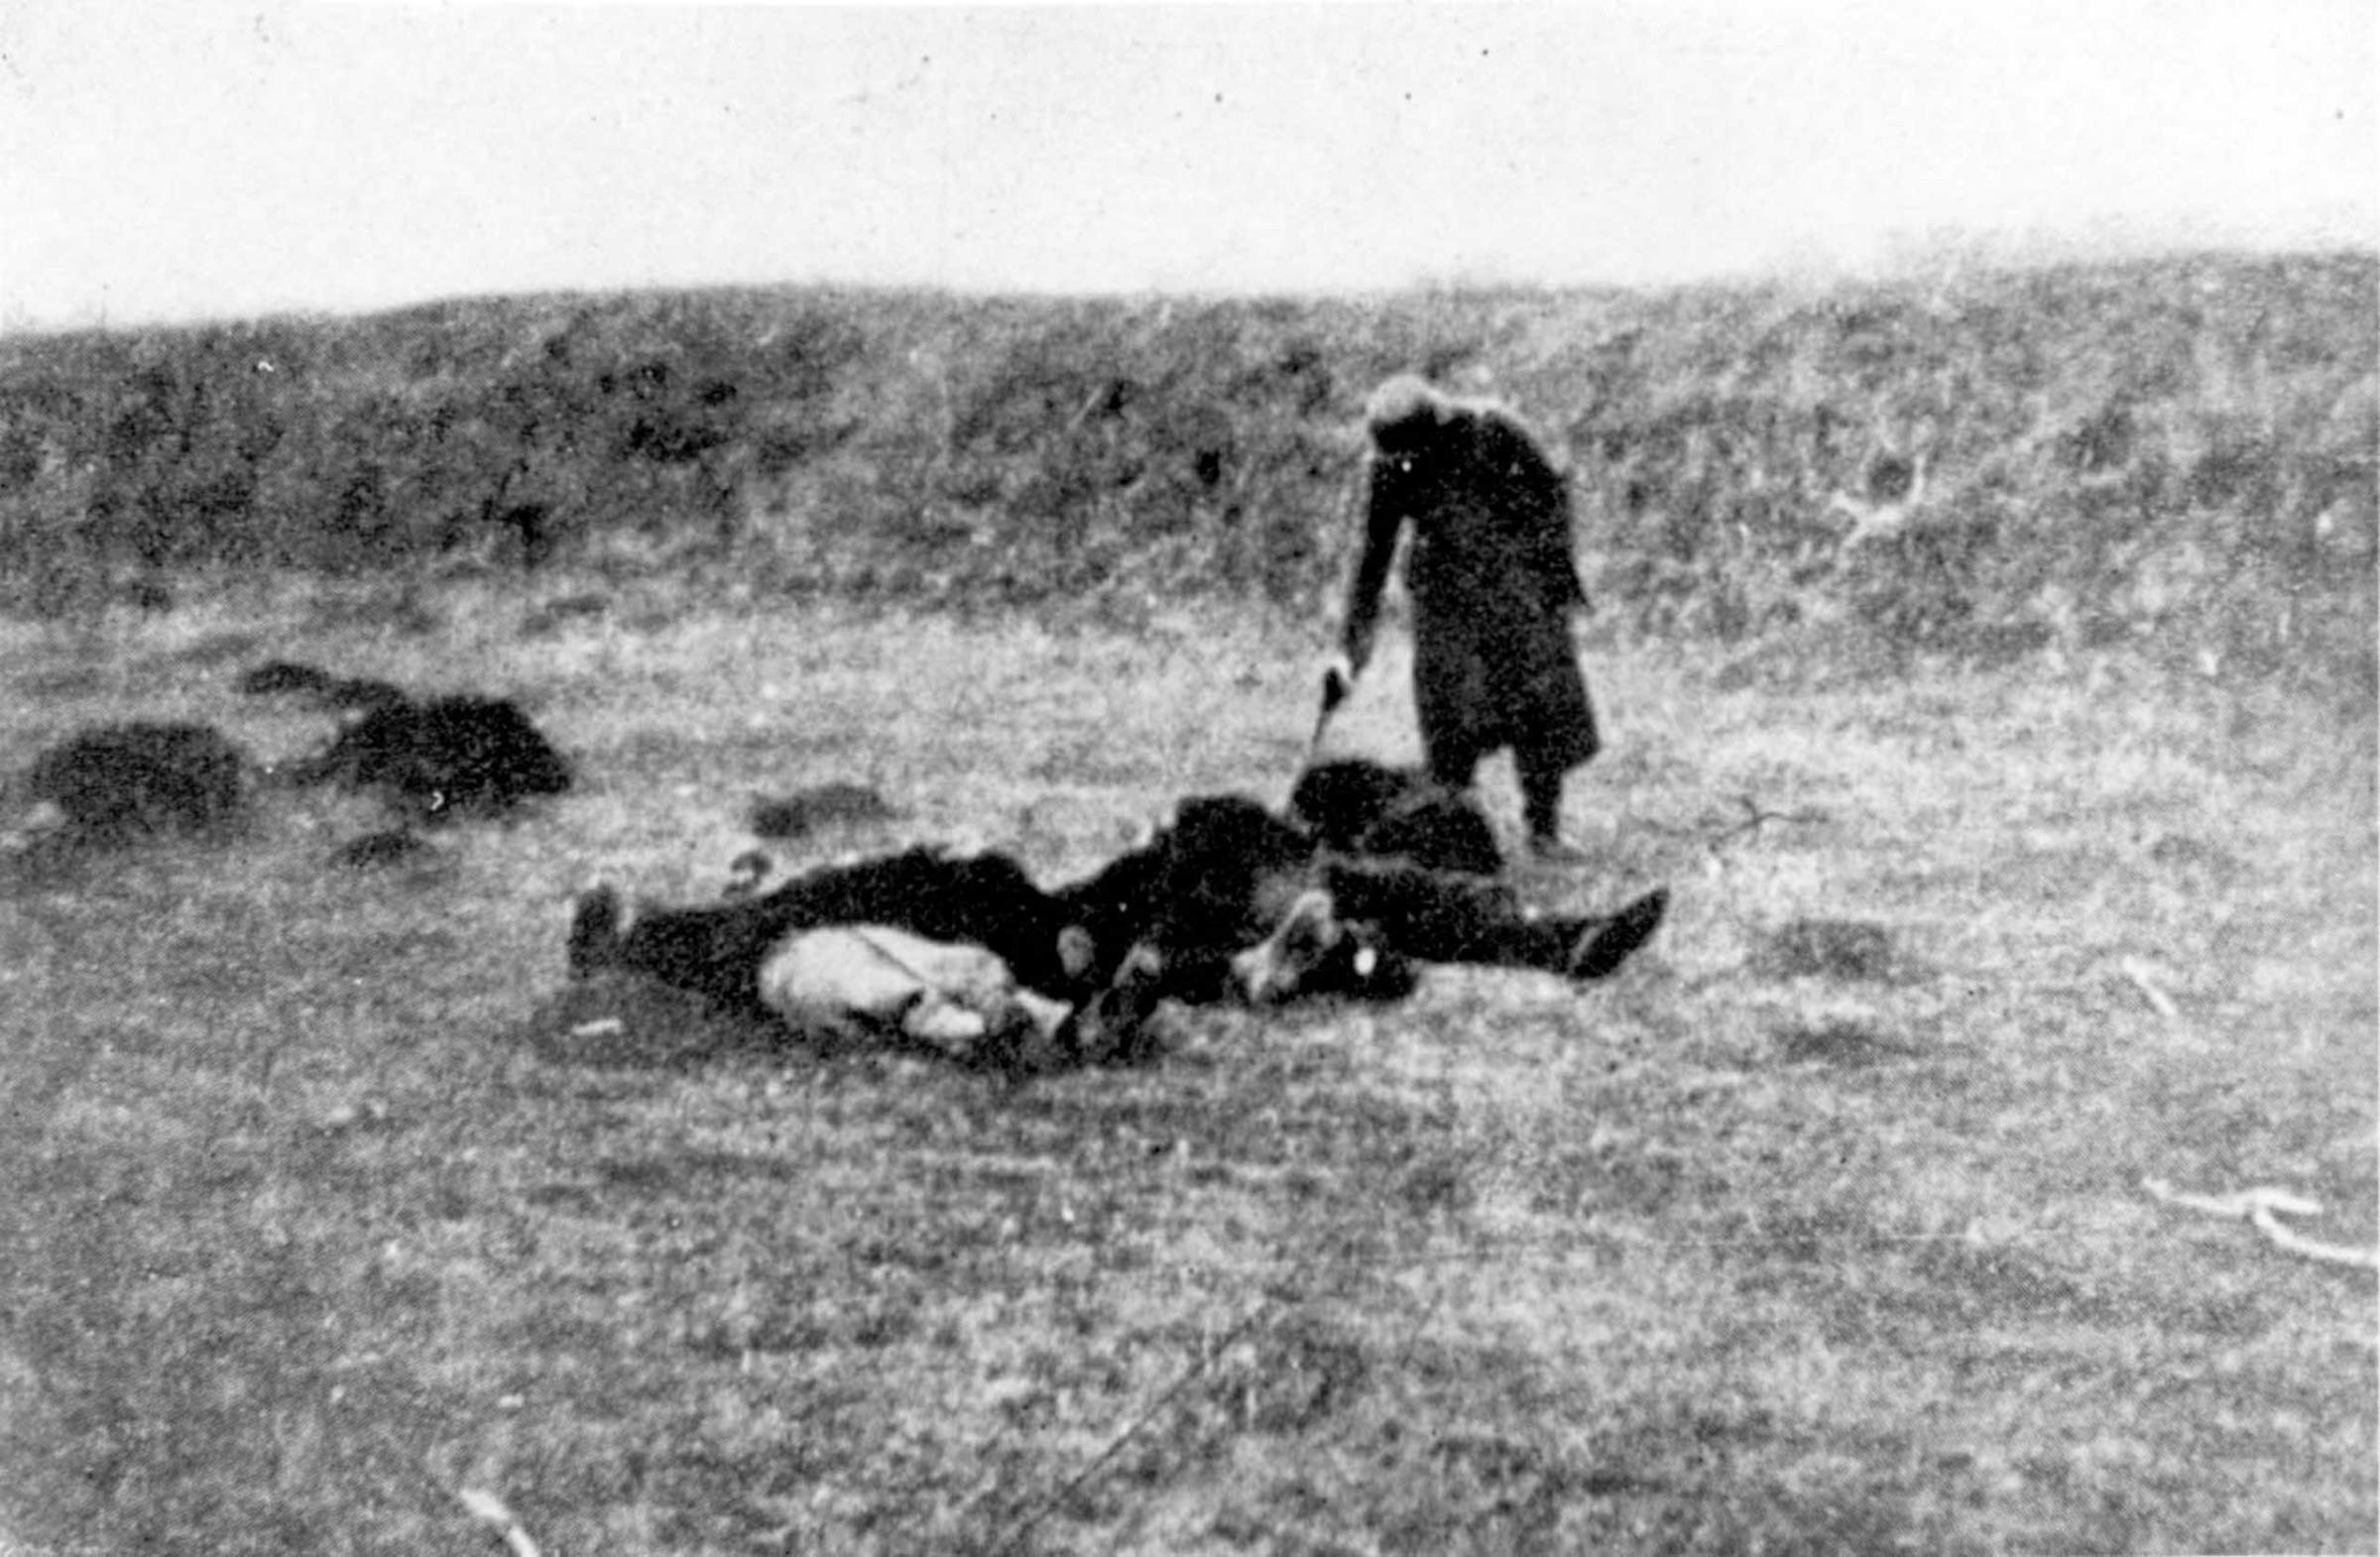 A German soldier shooting those who remained alive after a massacre in Yugoslavia, c. 1941.